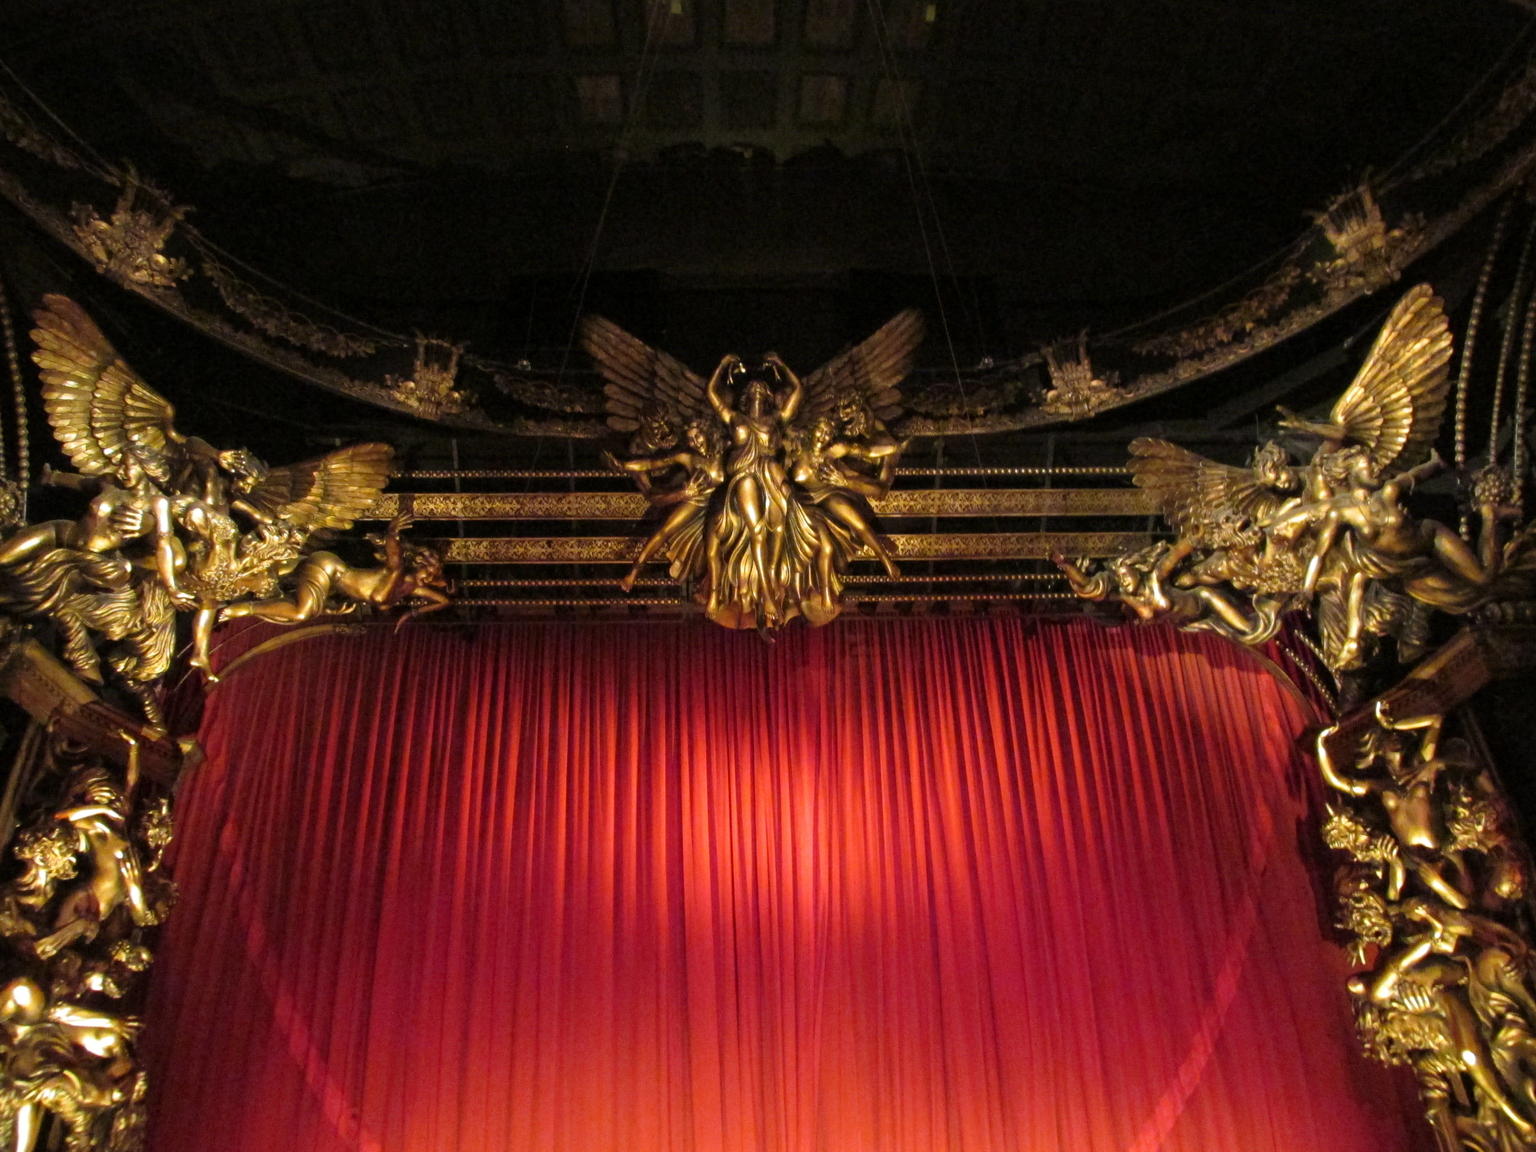 The upper portion of the stage at Her Majesty's Theater in London